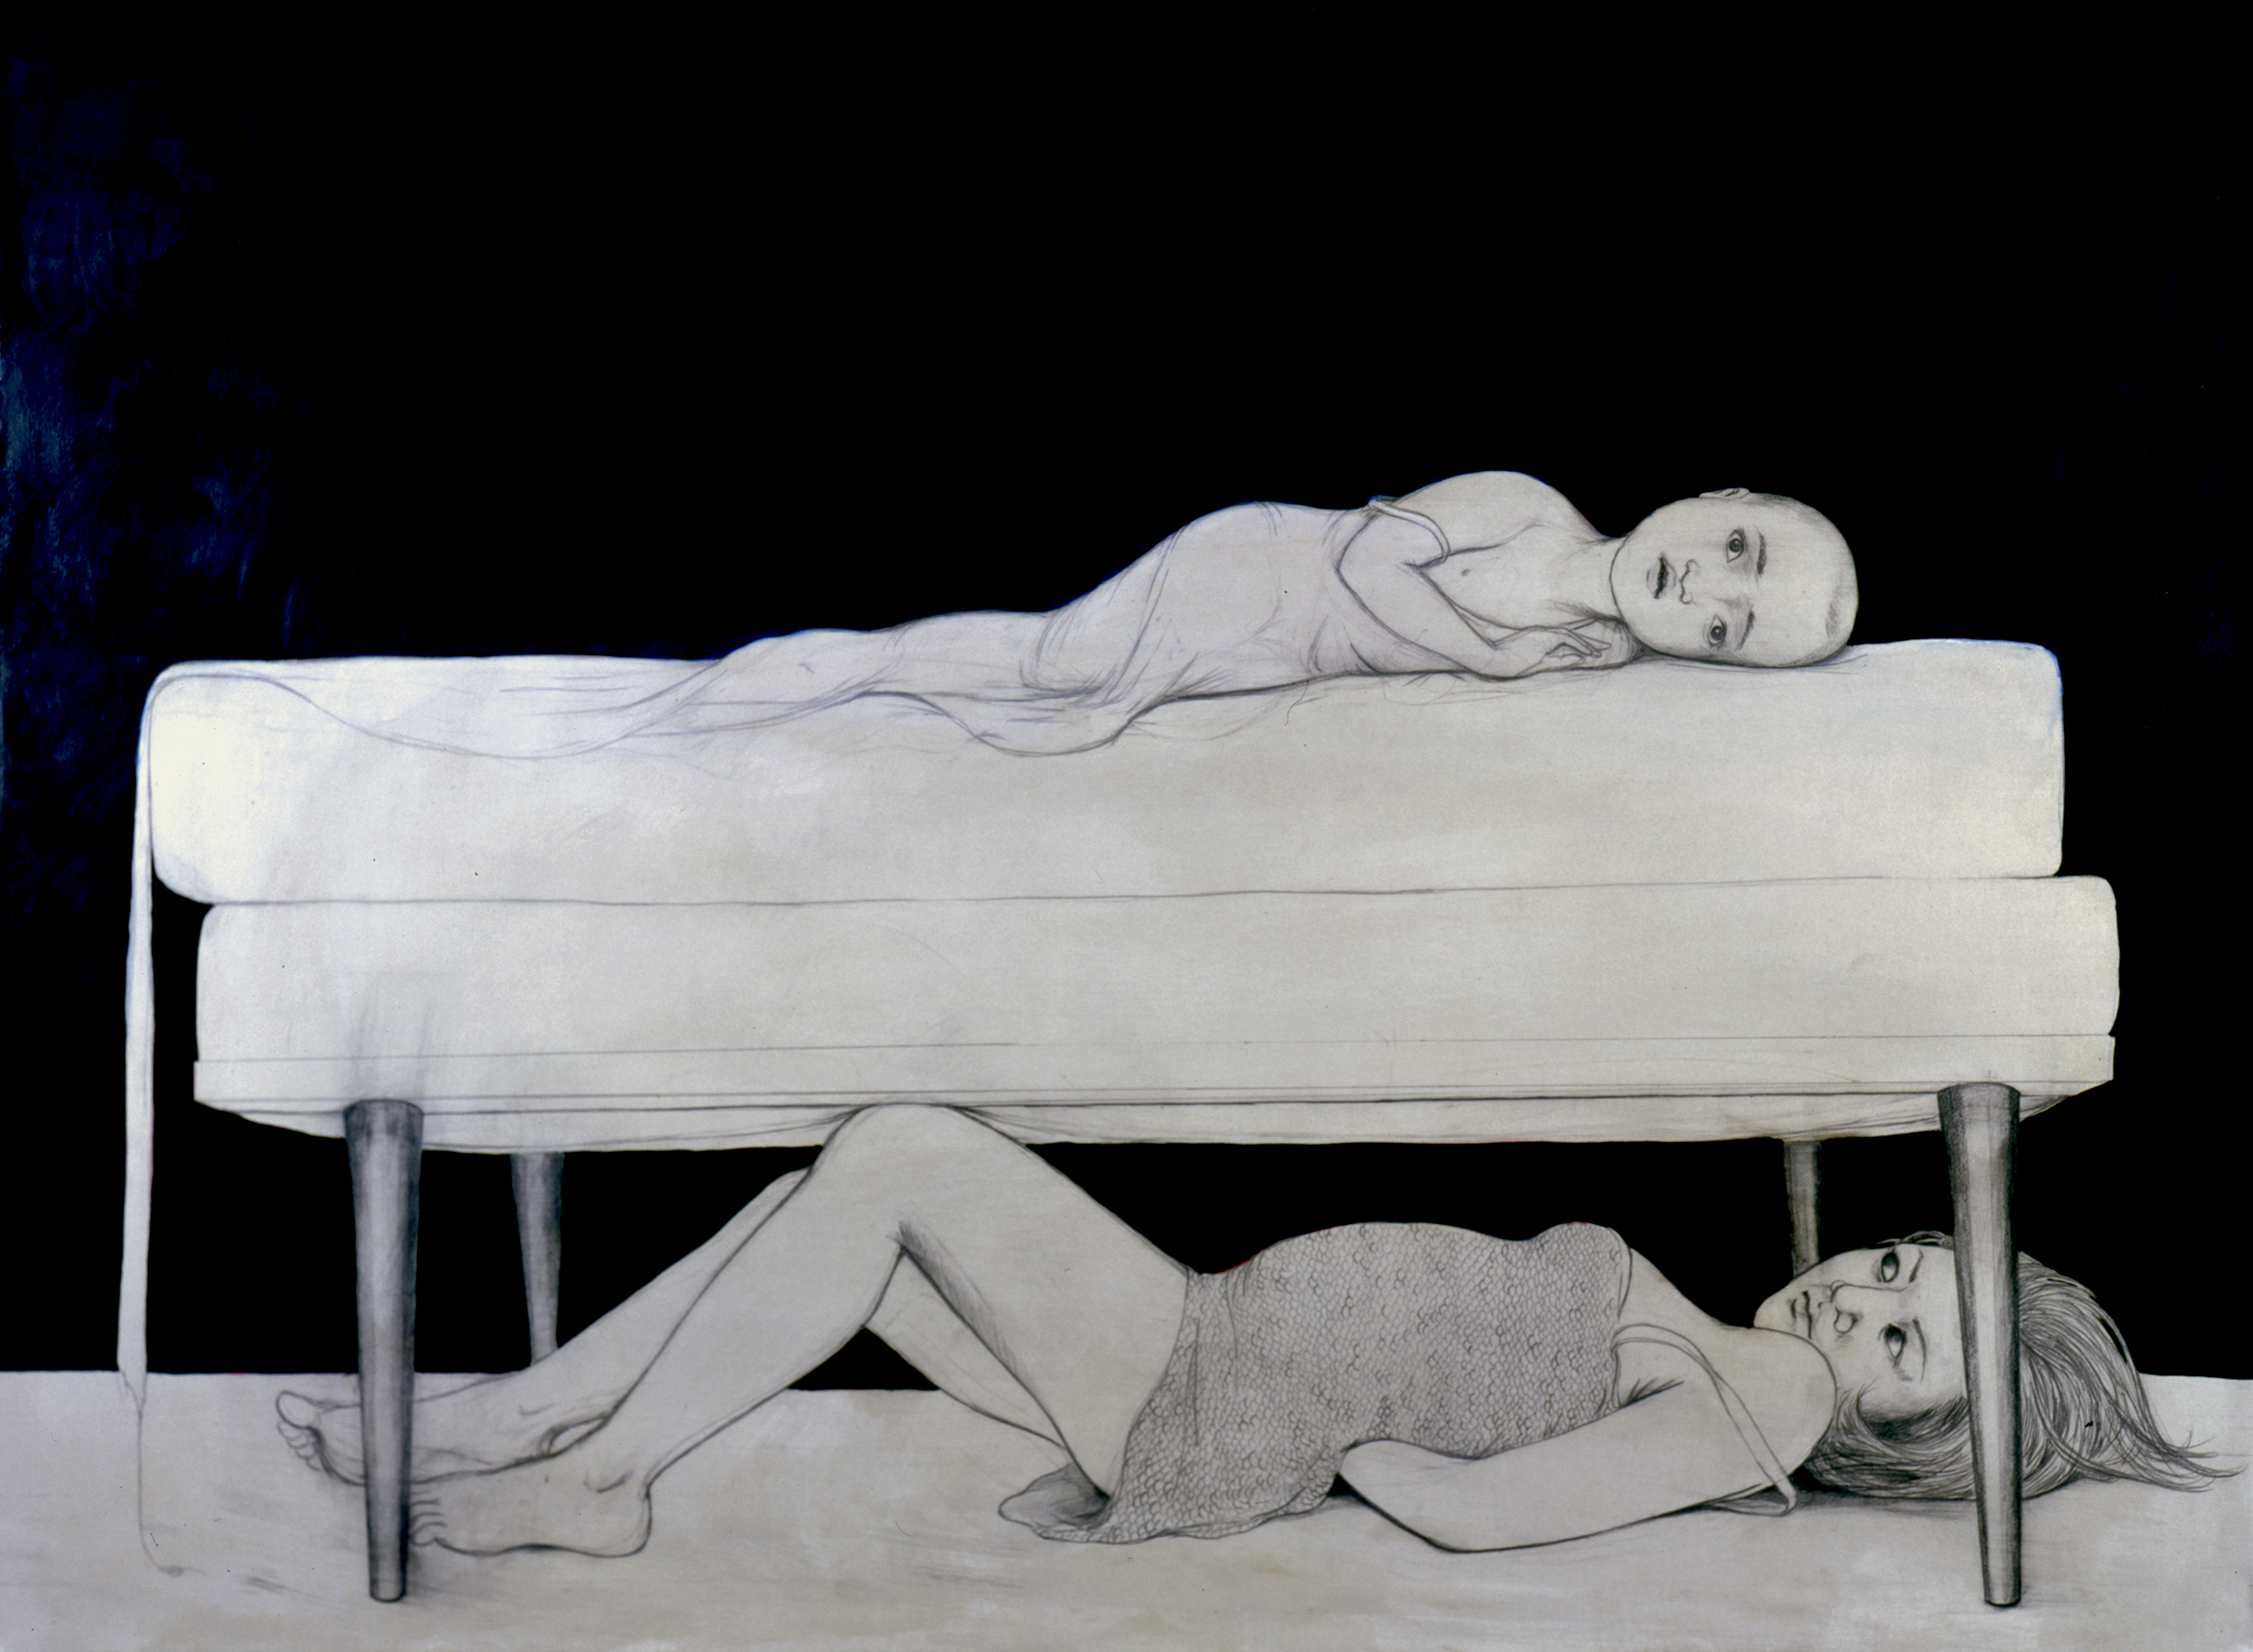   Under The Bed , 2004 Graphite, ink, acrylic on mounted gray paper 36 X 48 inches Private collection 